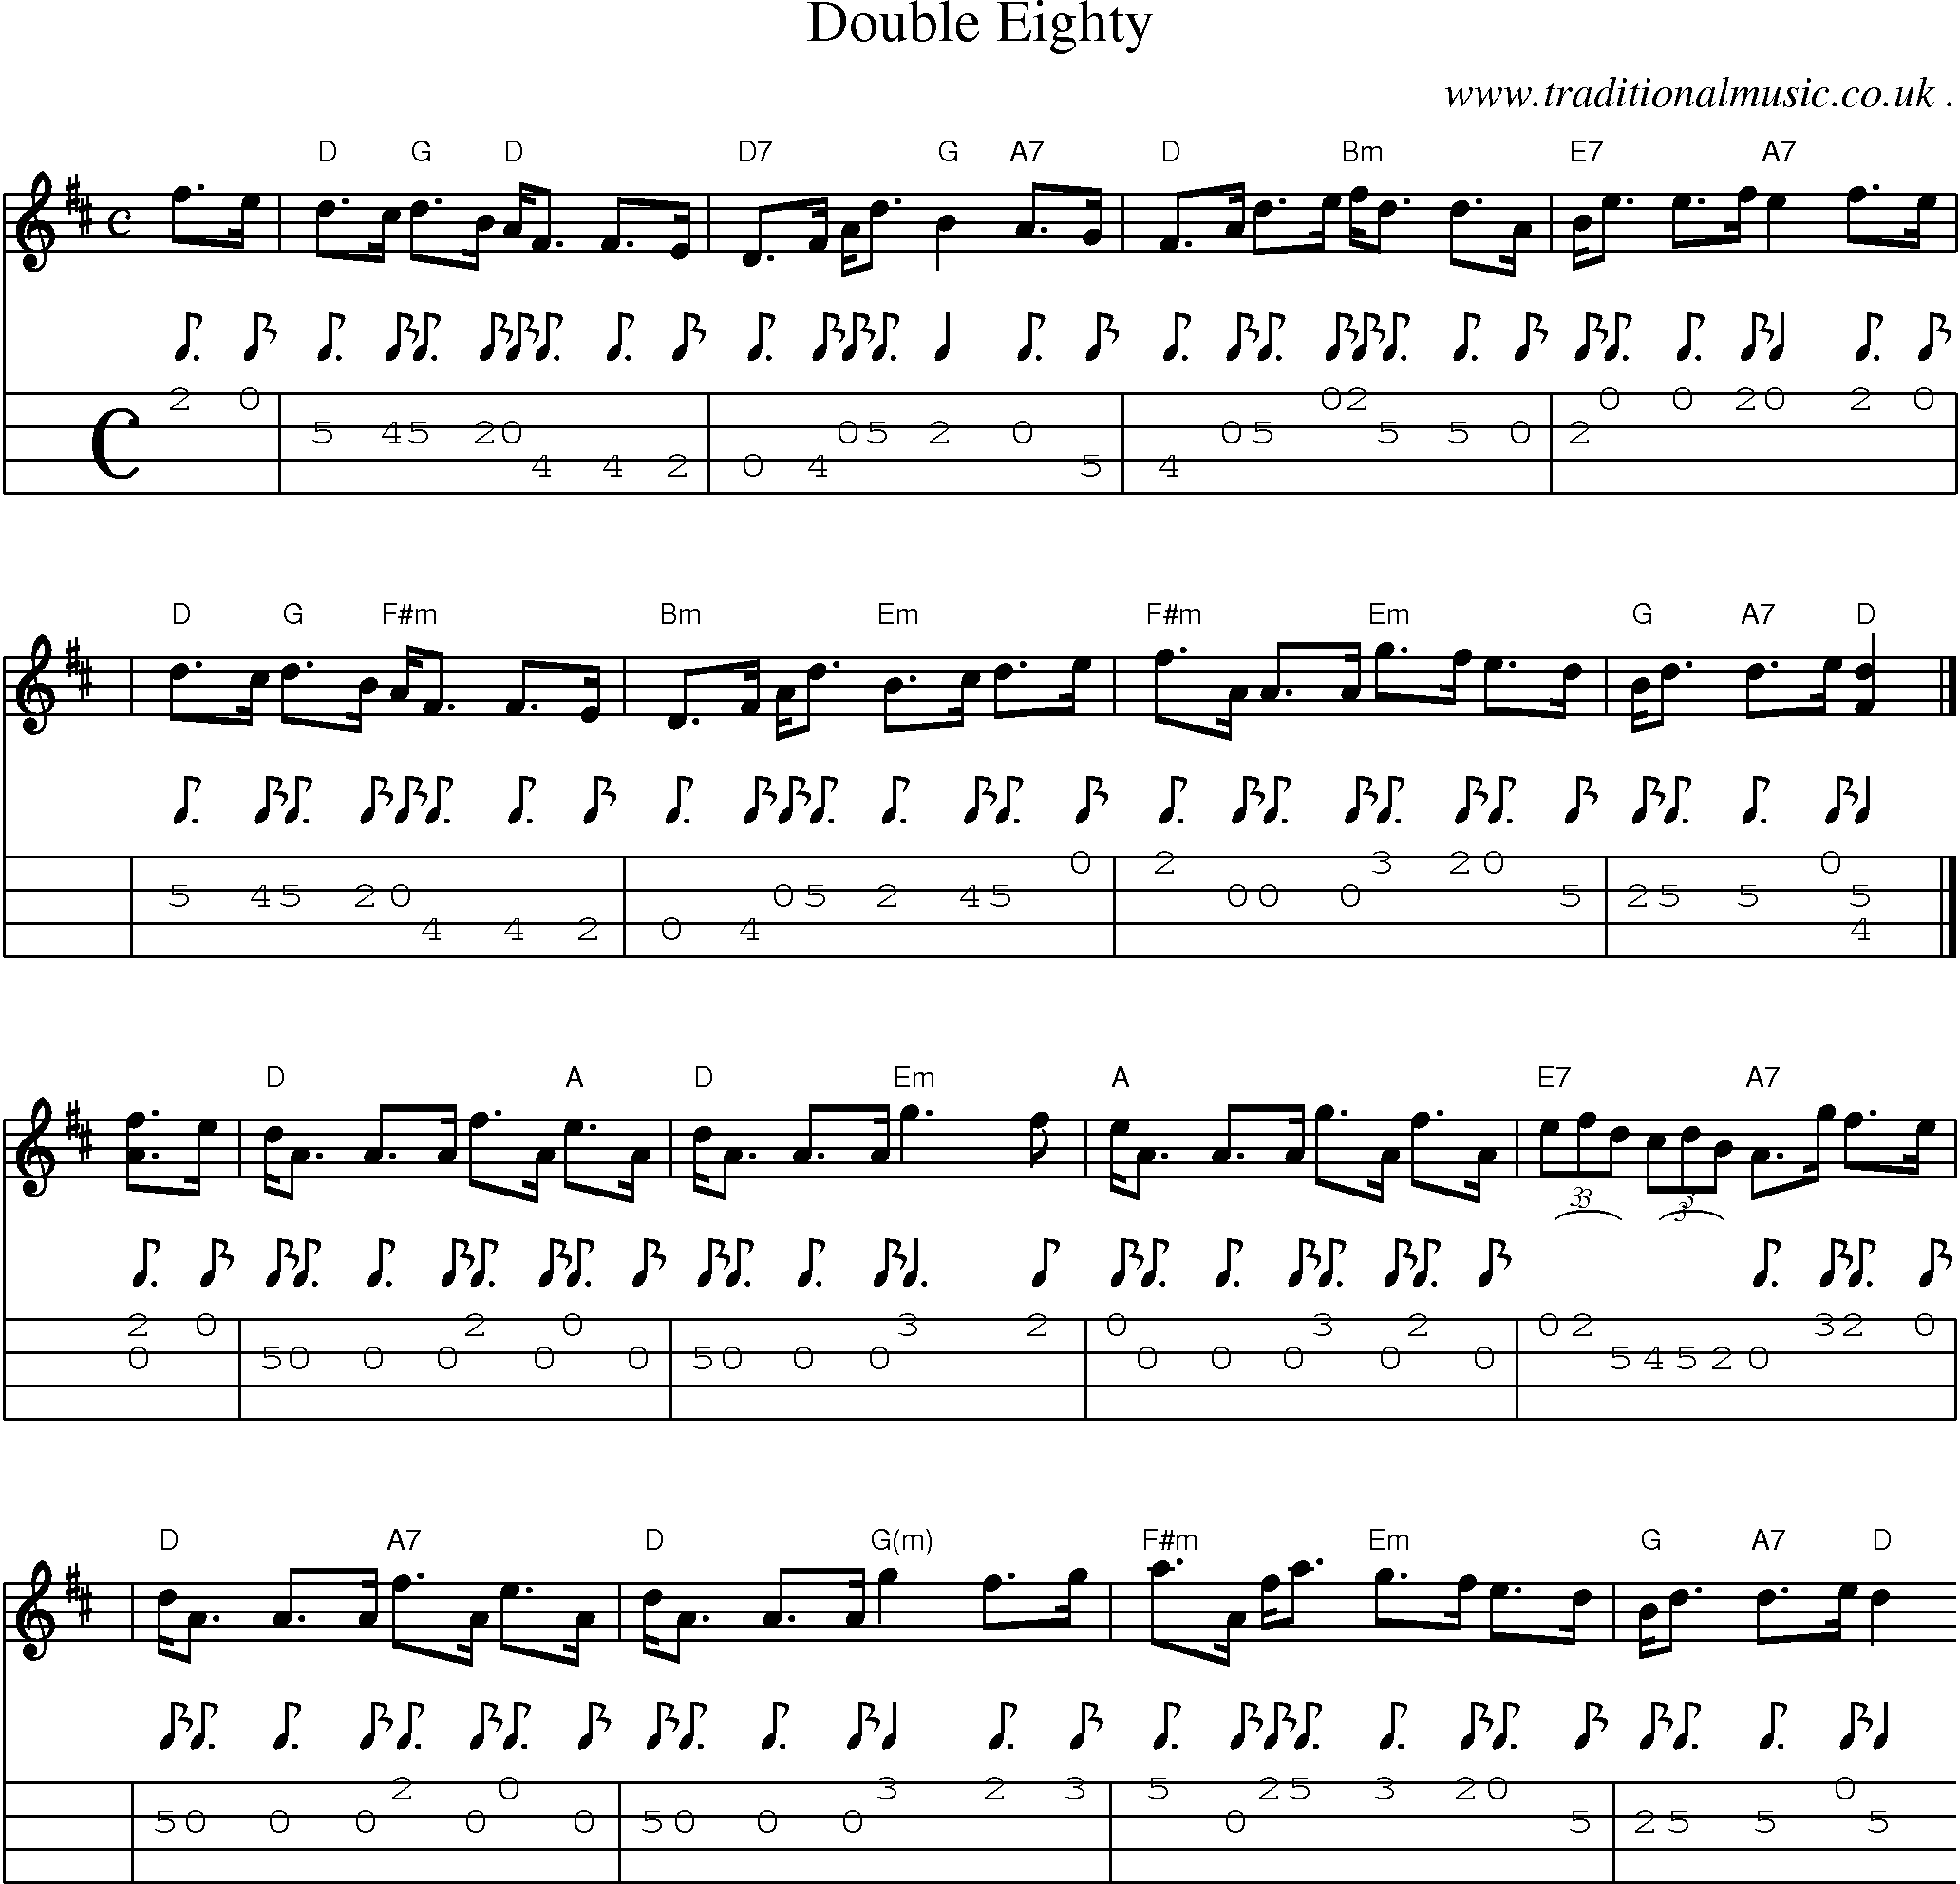 Sheet-music  score, Chords and Mandolin Tabs for Double Eighty